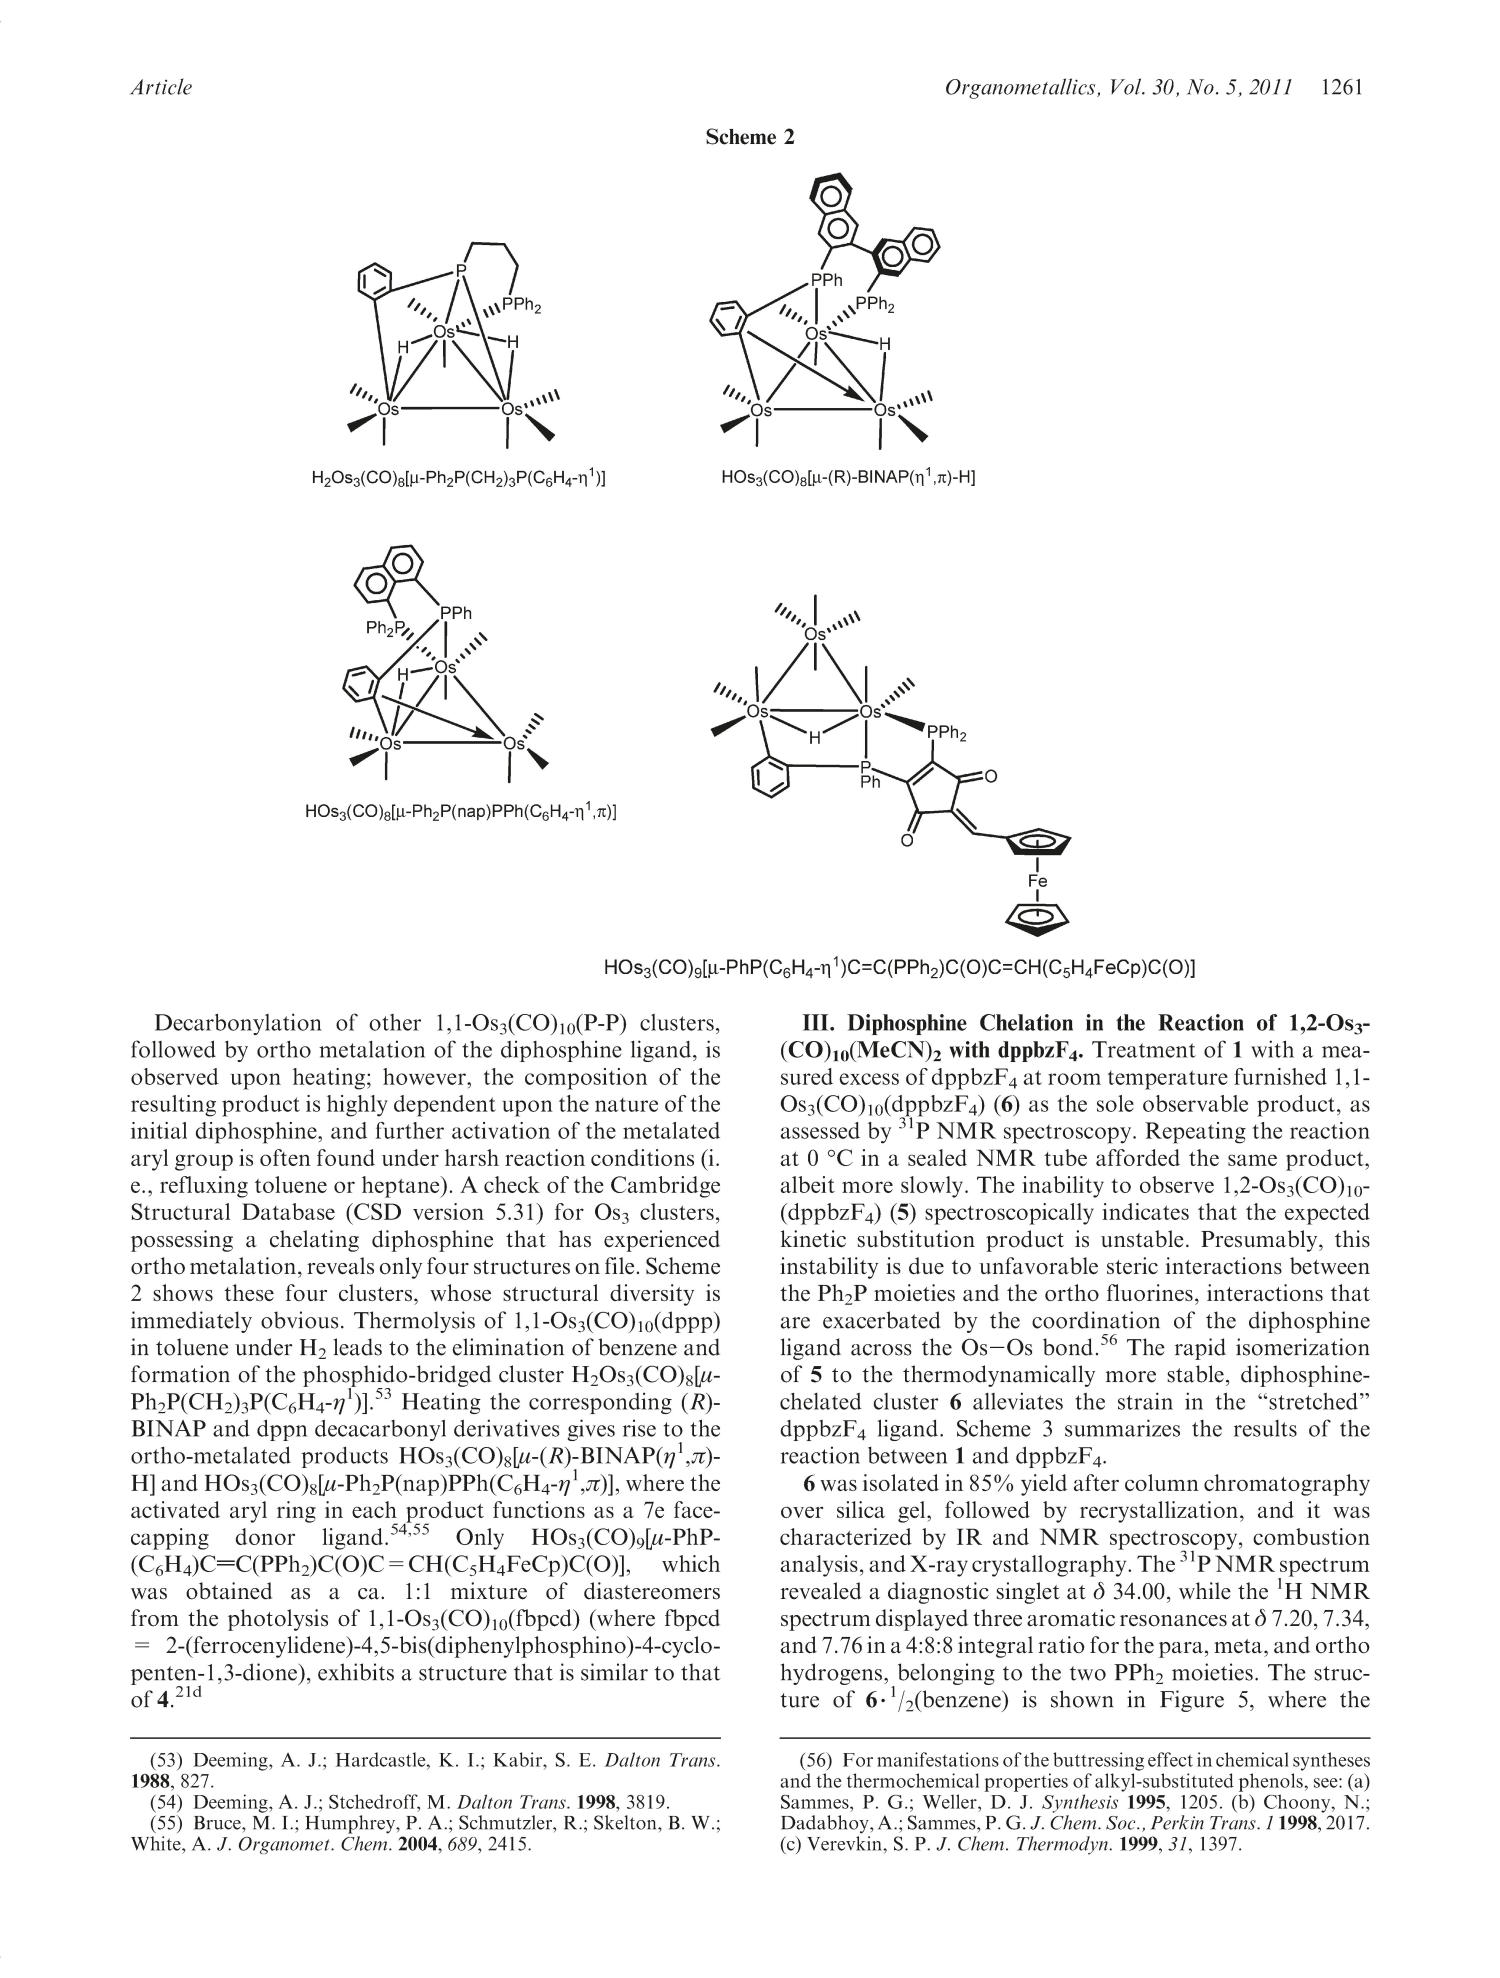 Experimental And Computational Studies Of The Isomerization Reactions Of Bidentate Phosphine Ligands In Triosmium Clusters Kinetics Of The Rearrangements From Bridged To Chelated Isomers And X Ray Structures Of The Clusters Os3 Co 10